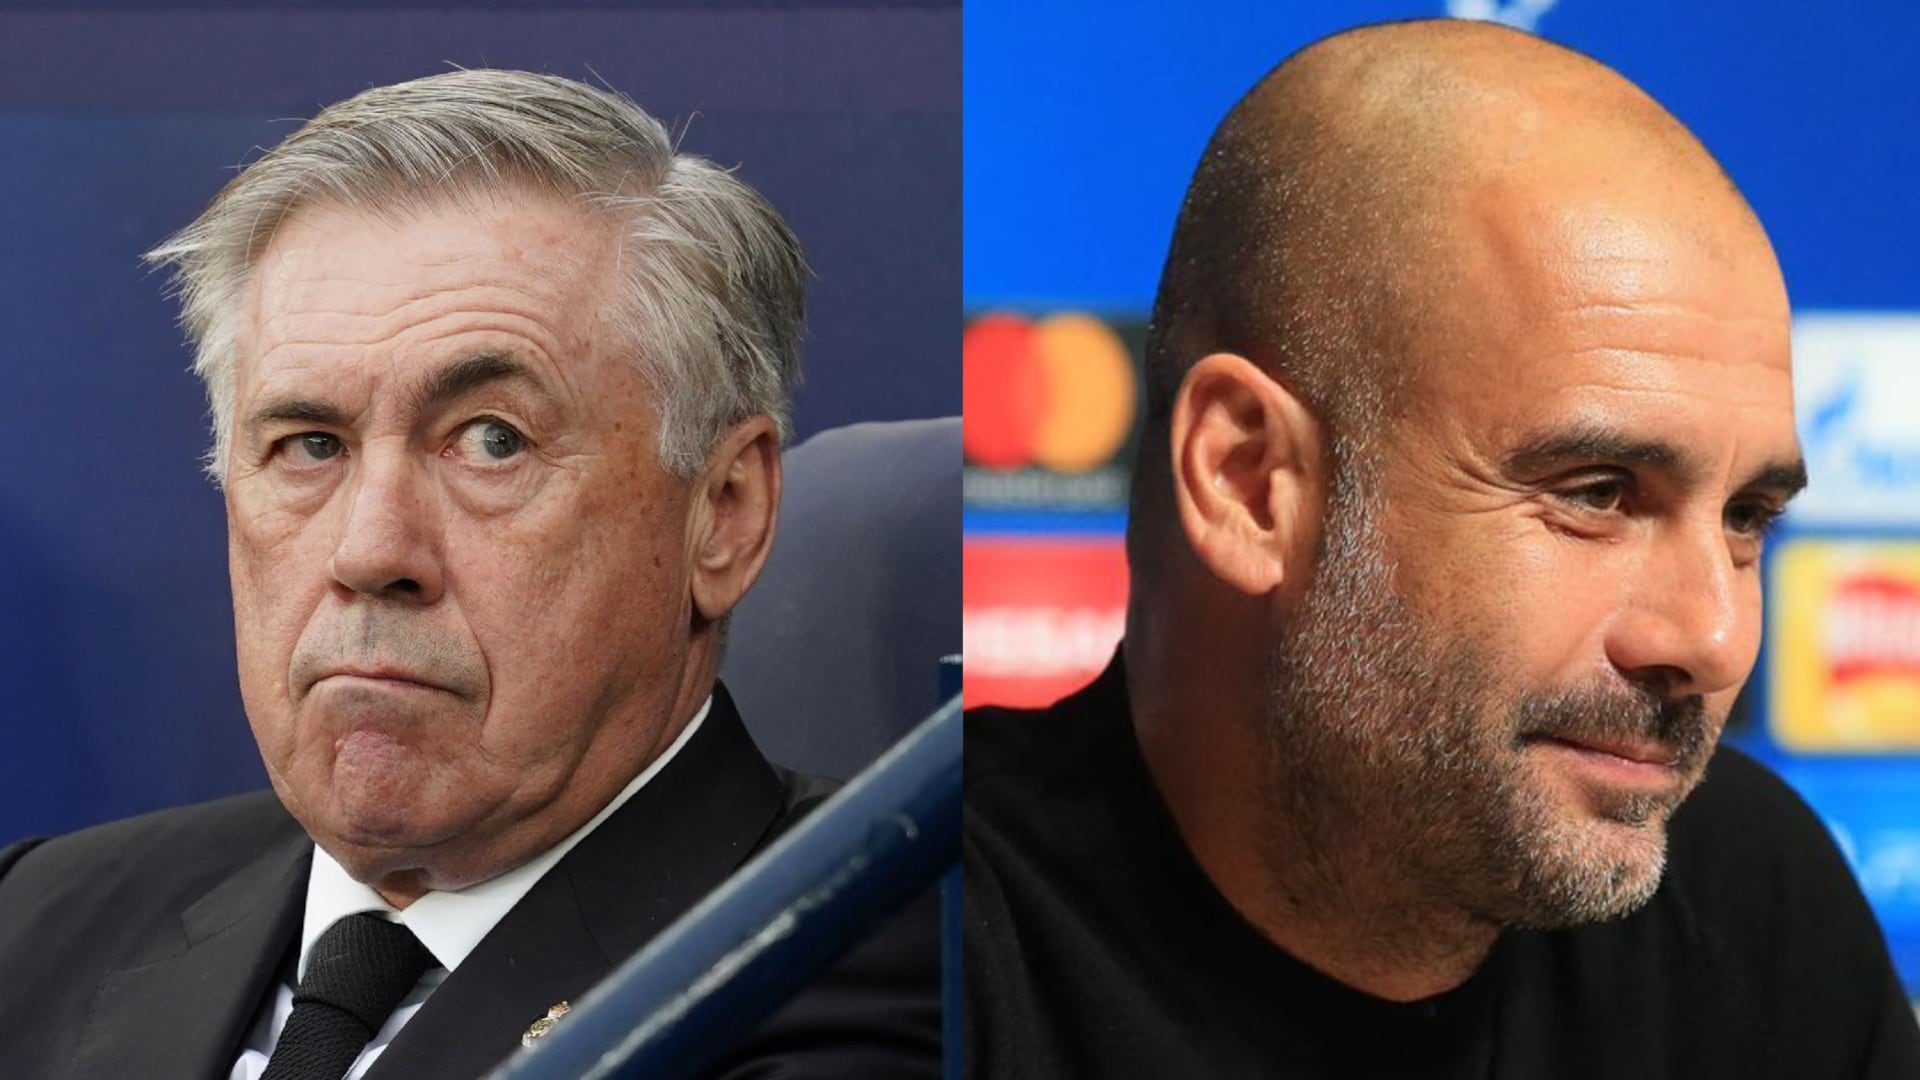 Real Madrid fans worried after these words from Ancelotti about Guardiola's City